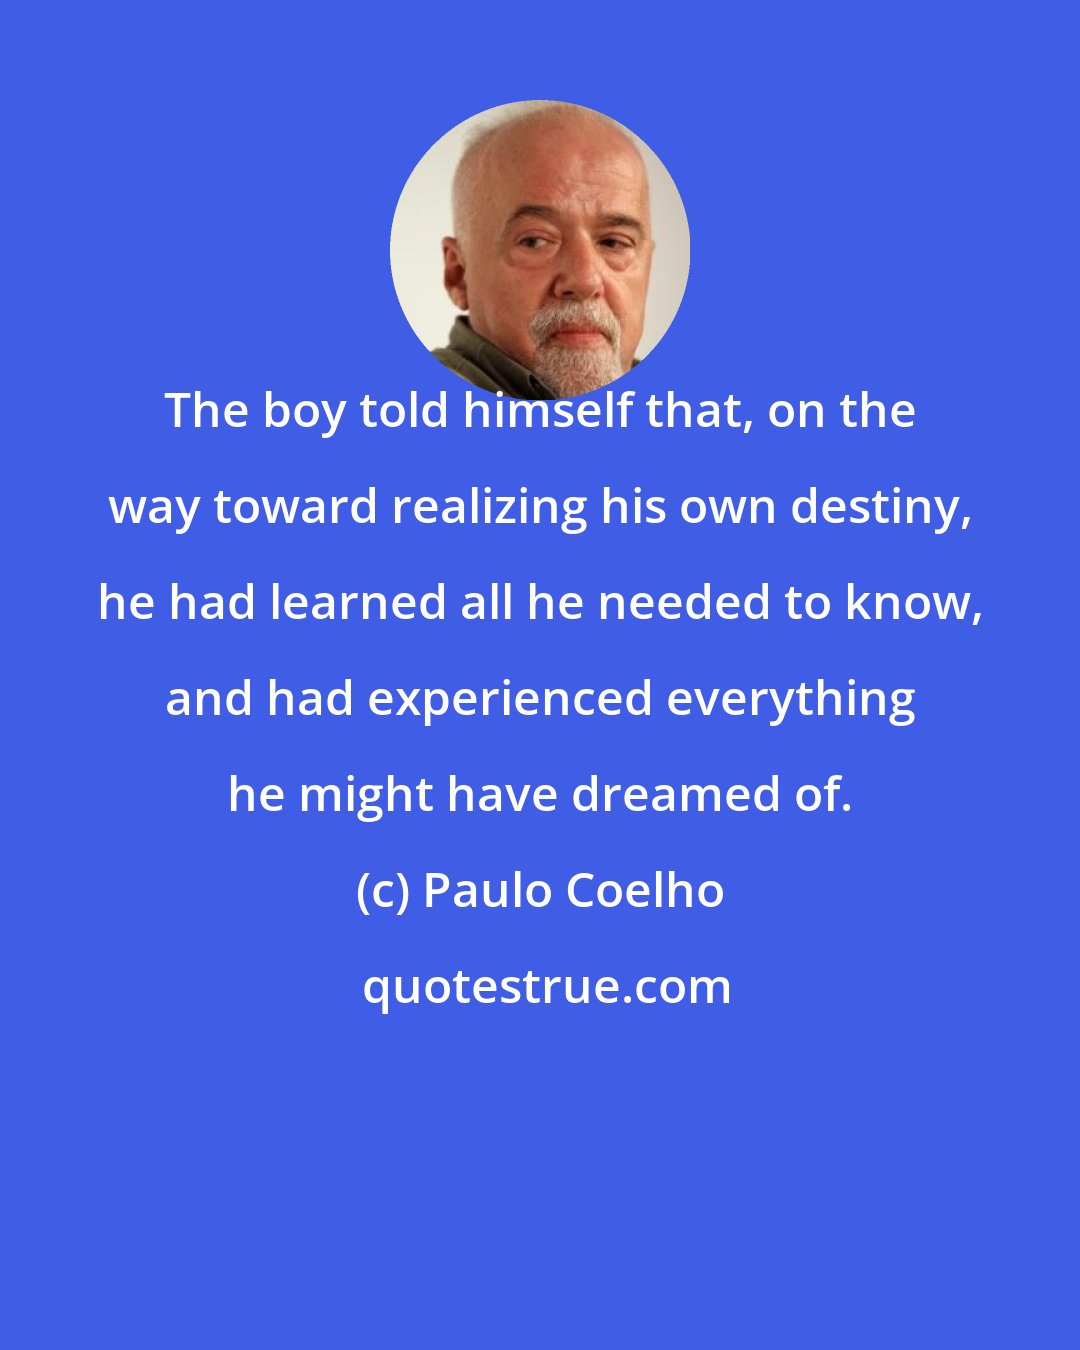 Paulo Coelho: The boy told himself that, on the way toward realizing his own destiny, he had learned all he needed to know, and had experienced everything he might have dreamed of.